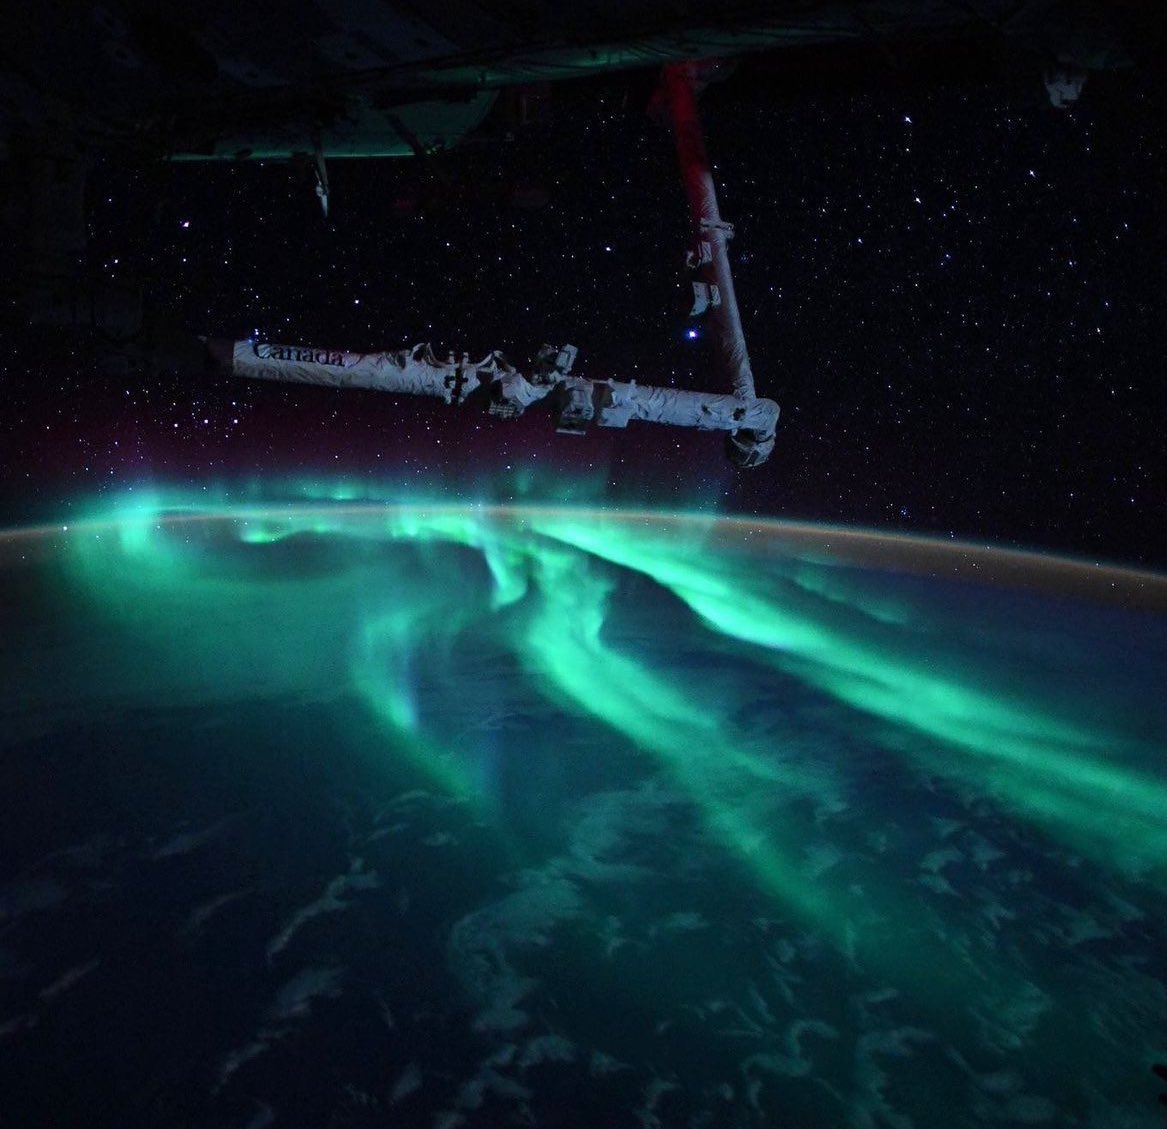 friendly reminder that THIS is what the aurora looks like from space